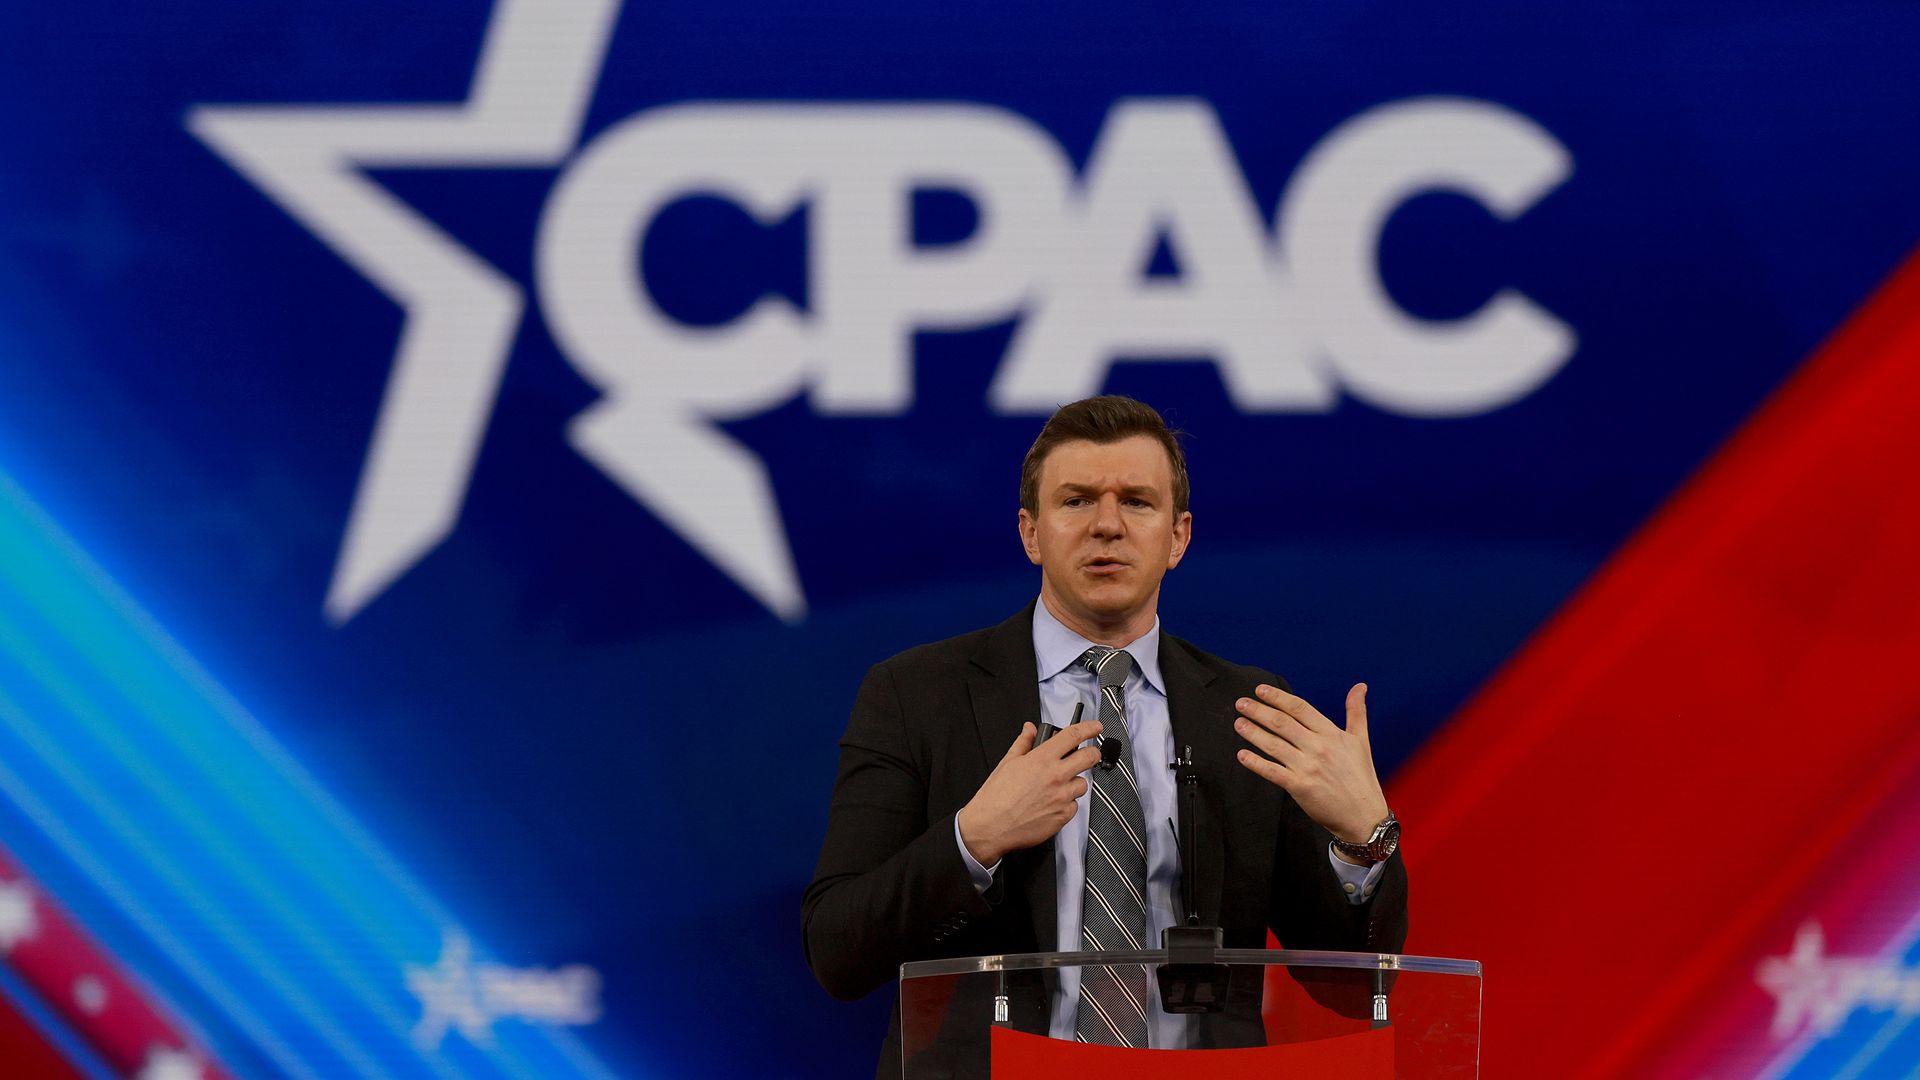 James O’Keefe, President of Project Veritas, speaks during CPAC